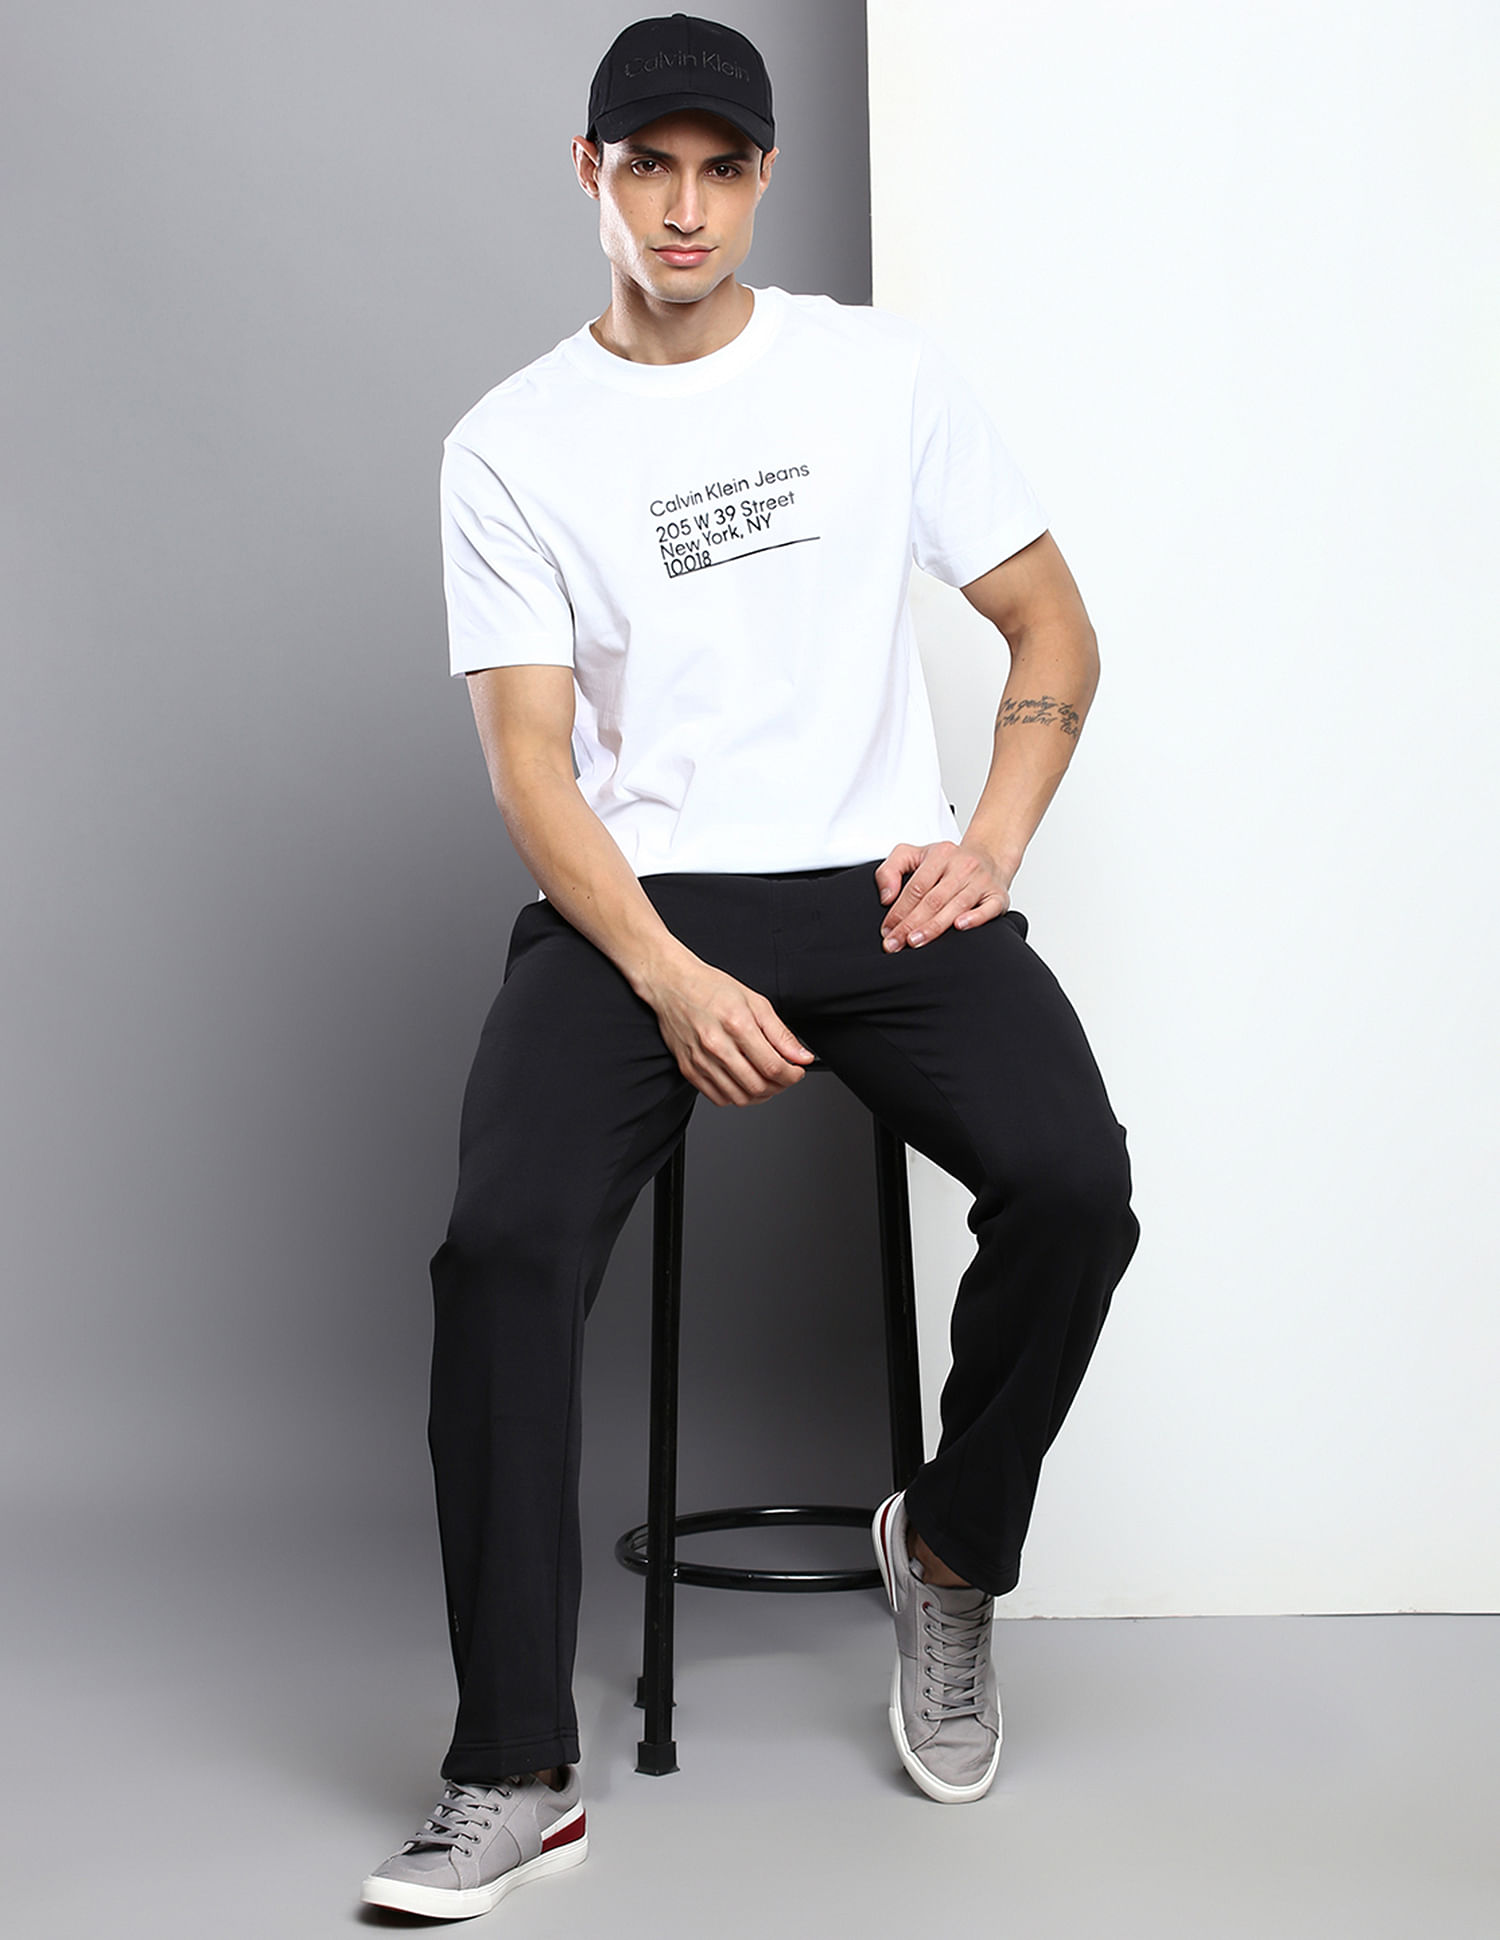 White T-Shirt And Black Trousers Minimalistic Outfit - Your Average Guy